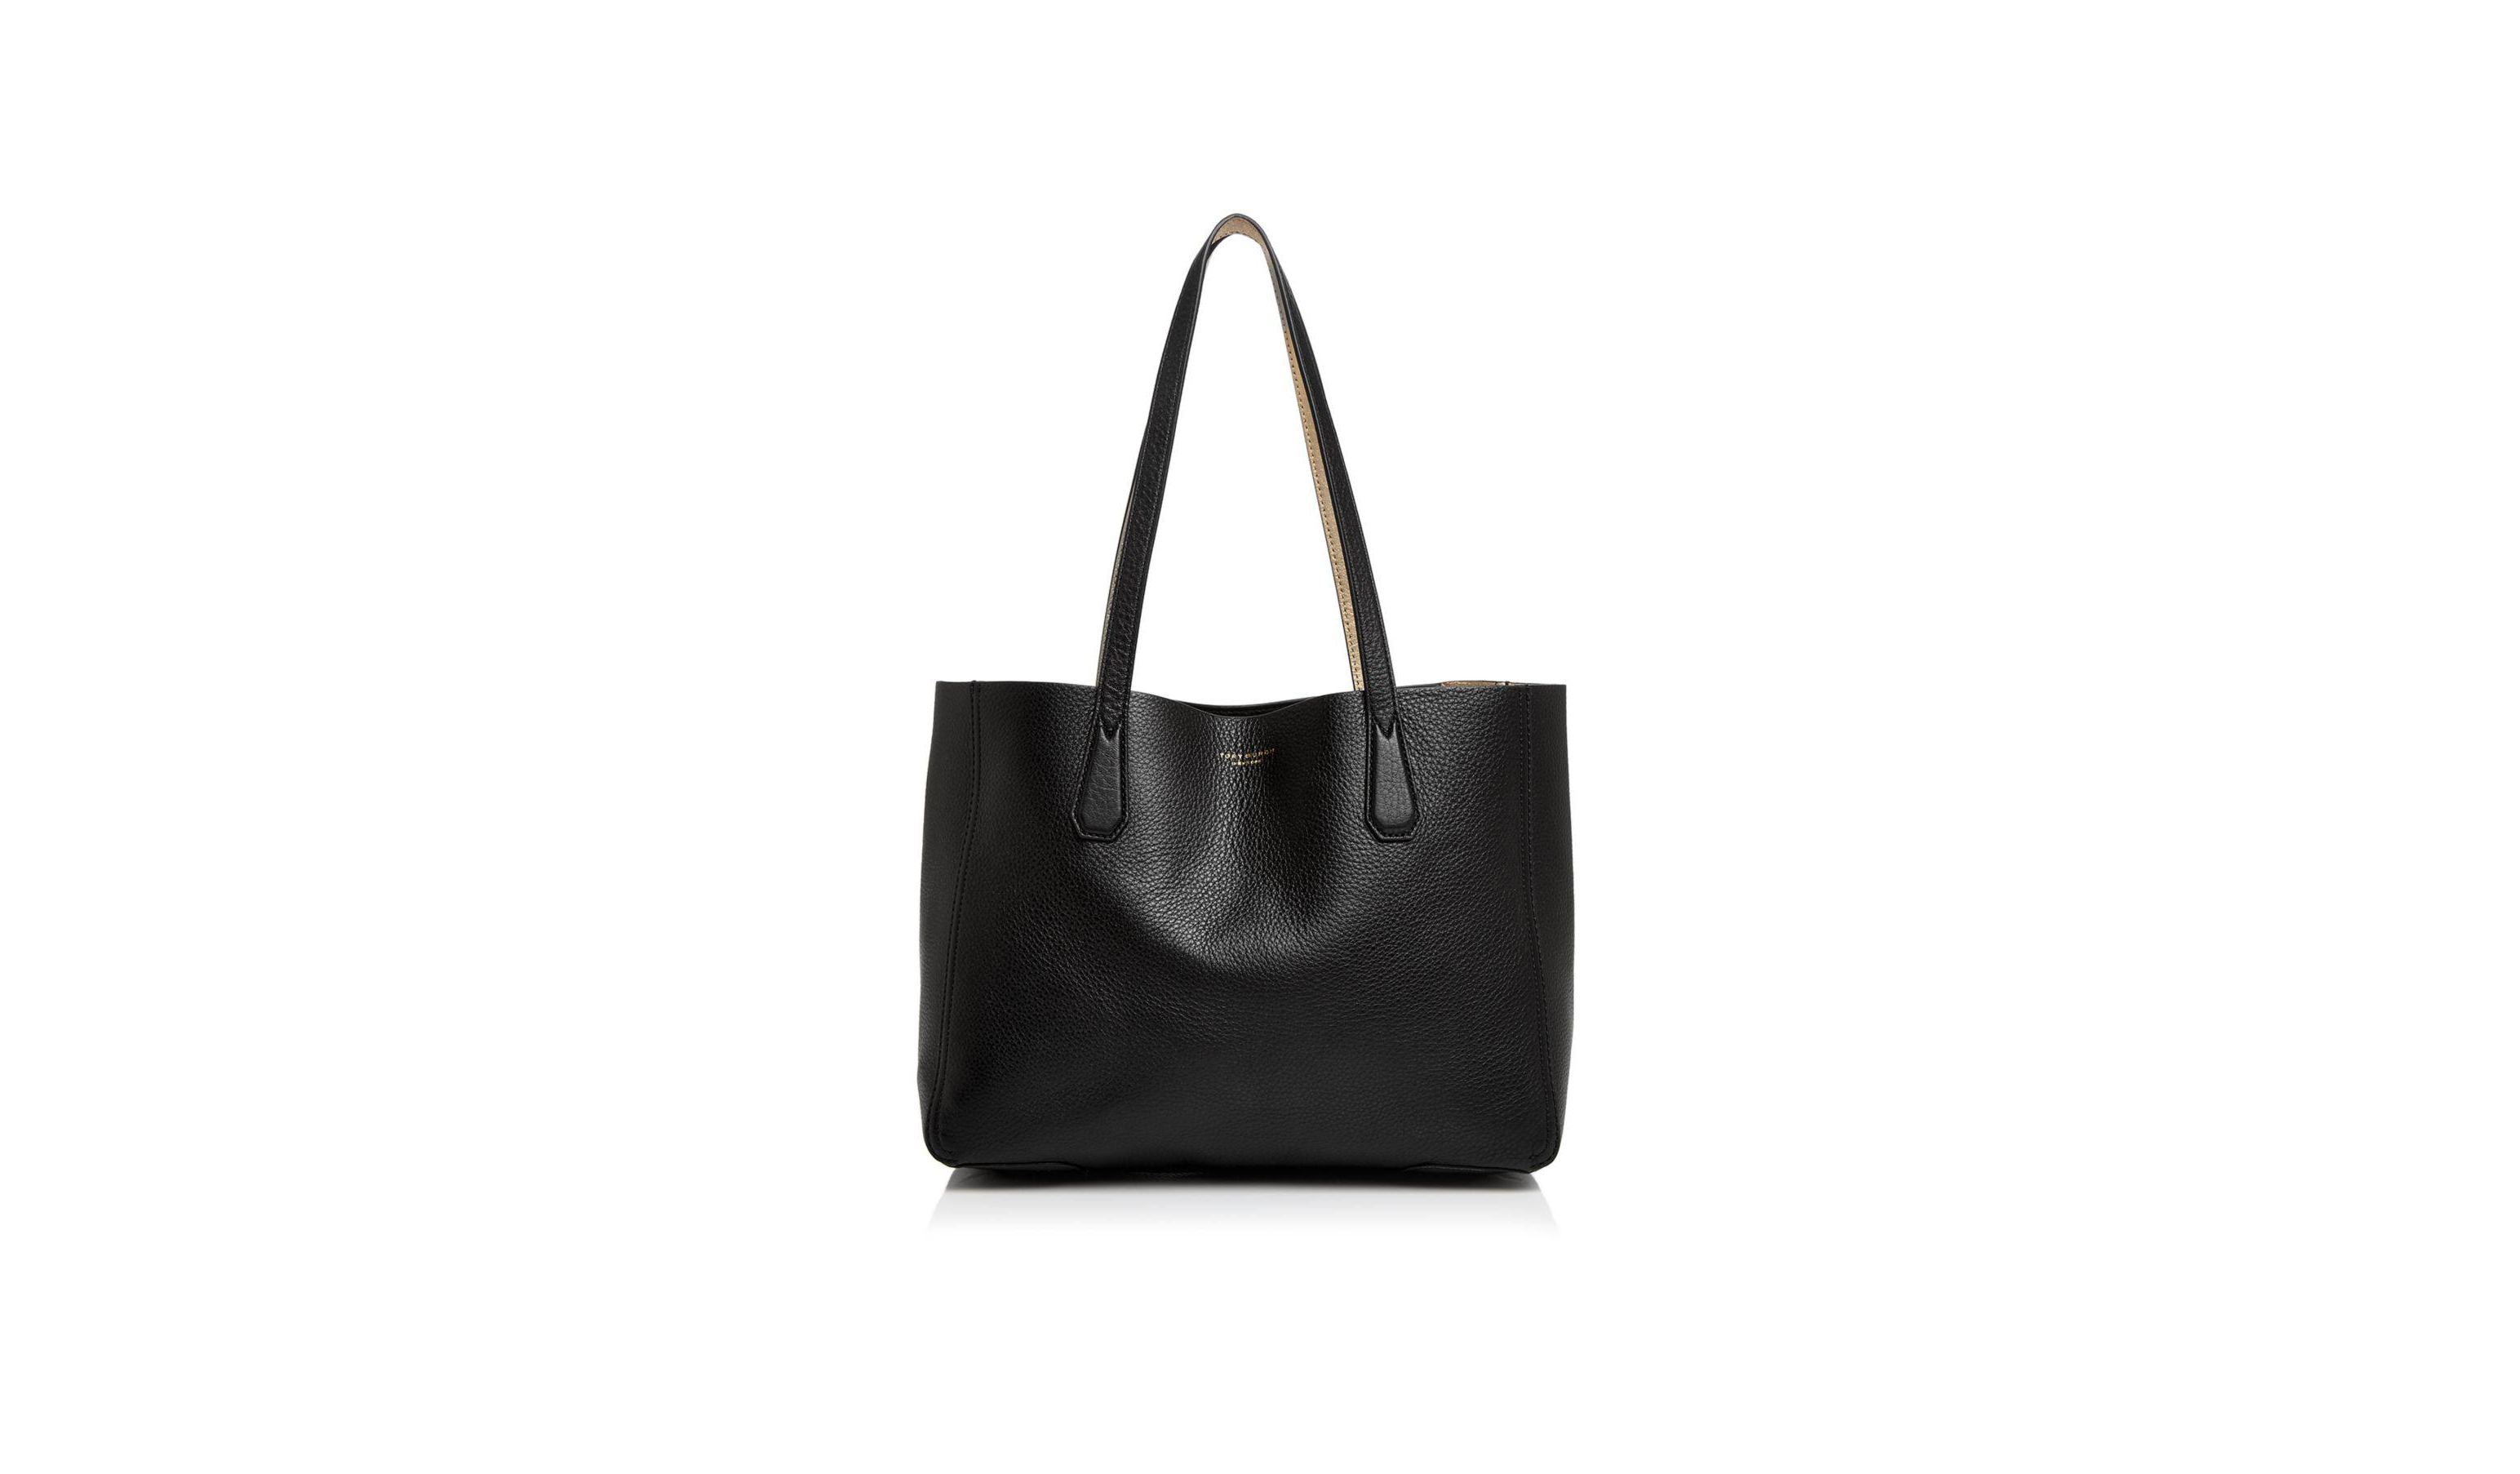 This Tory Burch Leather Tote Is the Perfect Everyday Bag